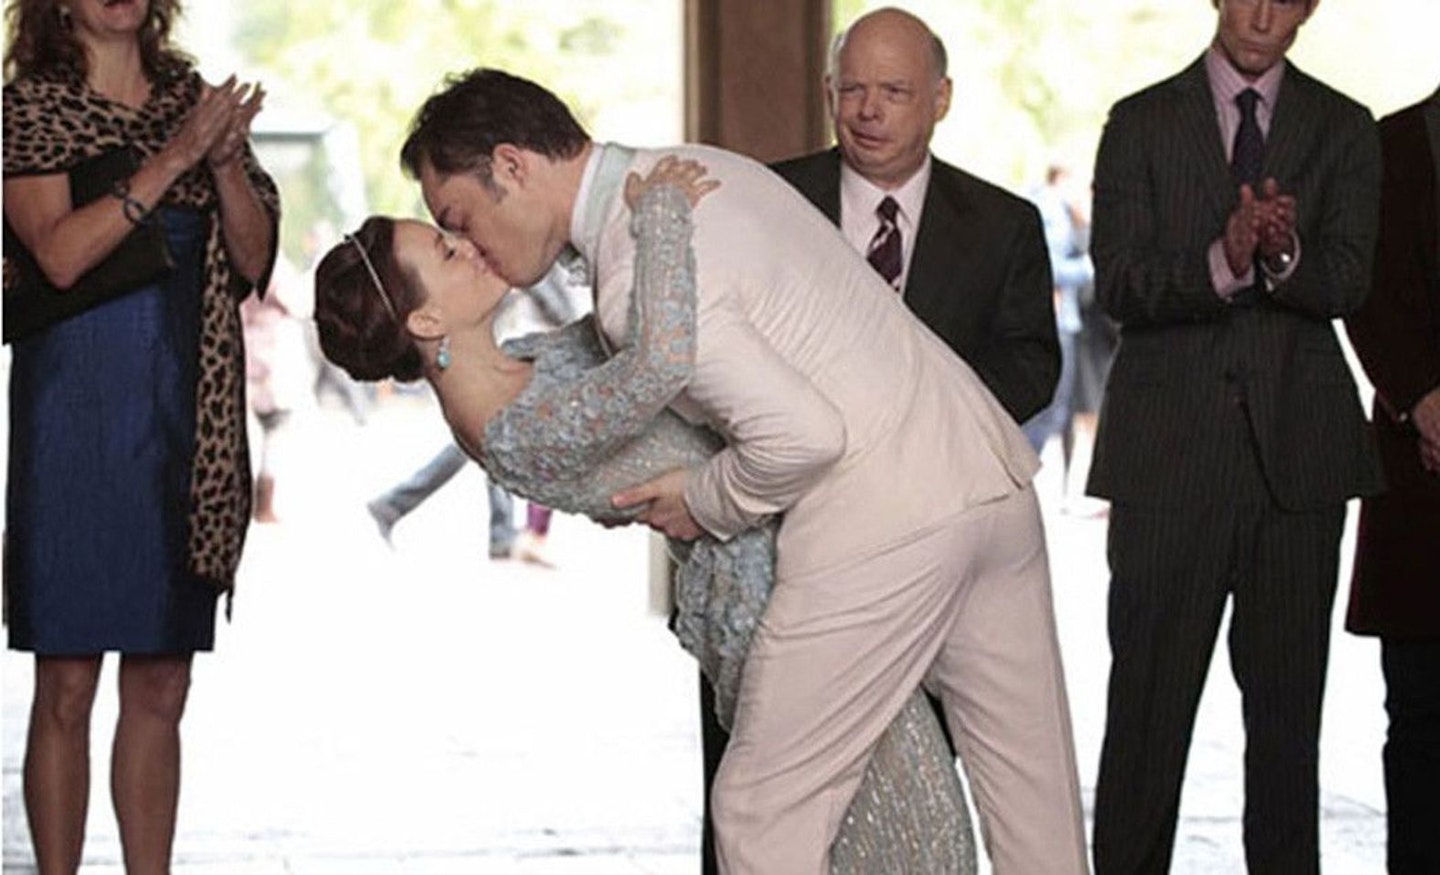 Gossip Girl': Why the New Characters Might Remind You of Blair